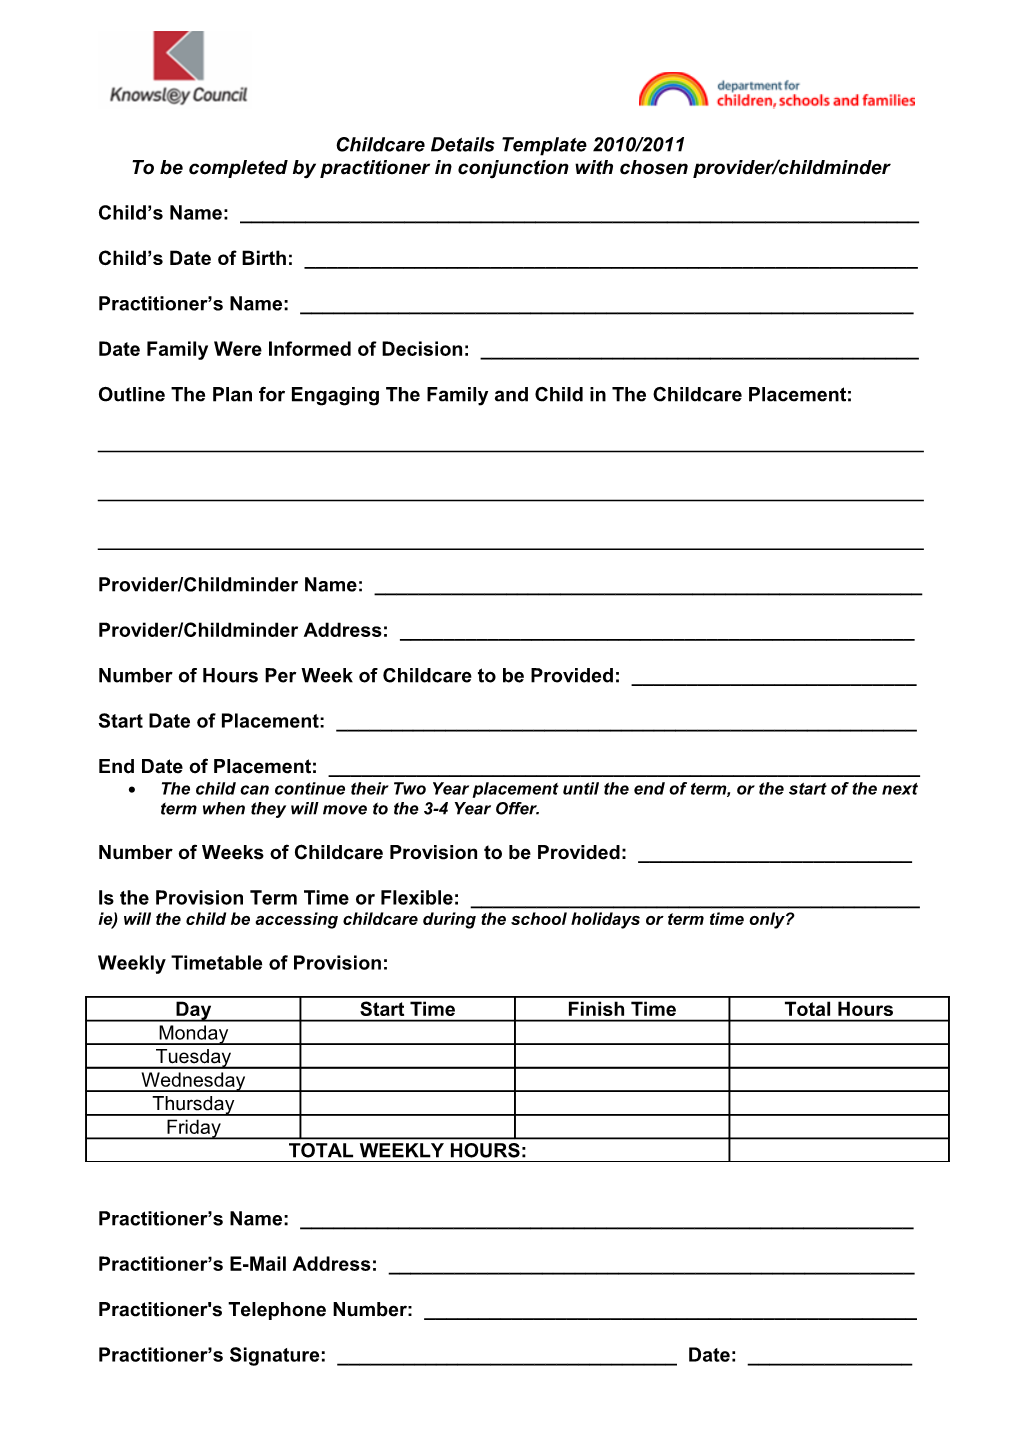 Childcare Details Template